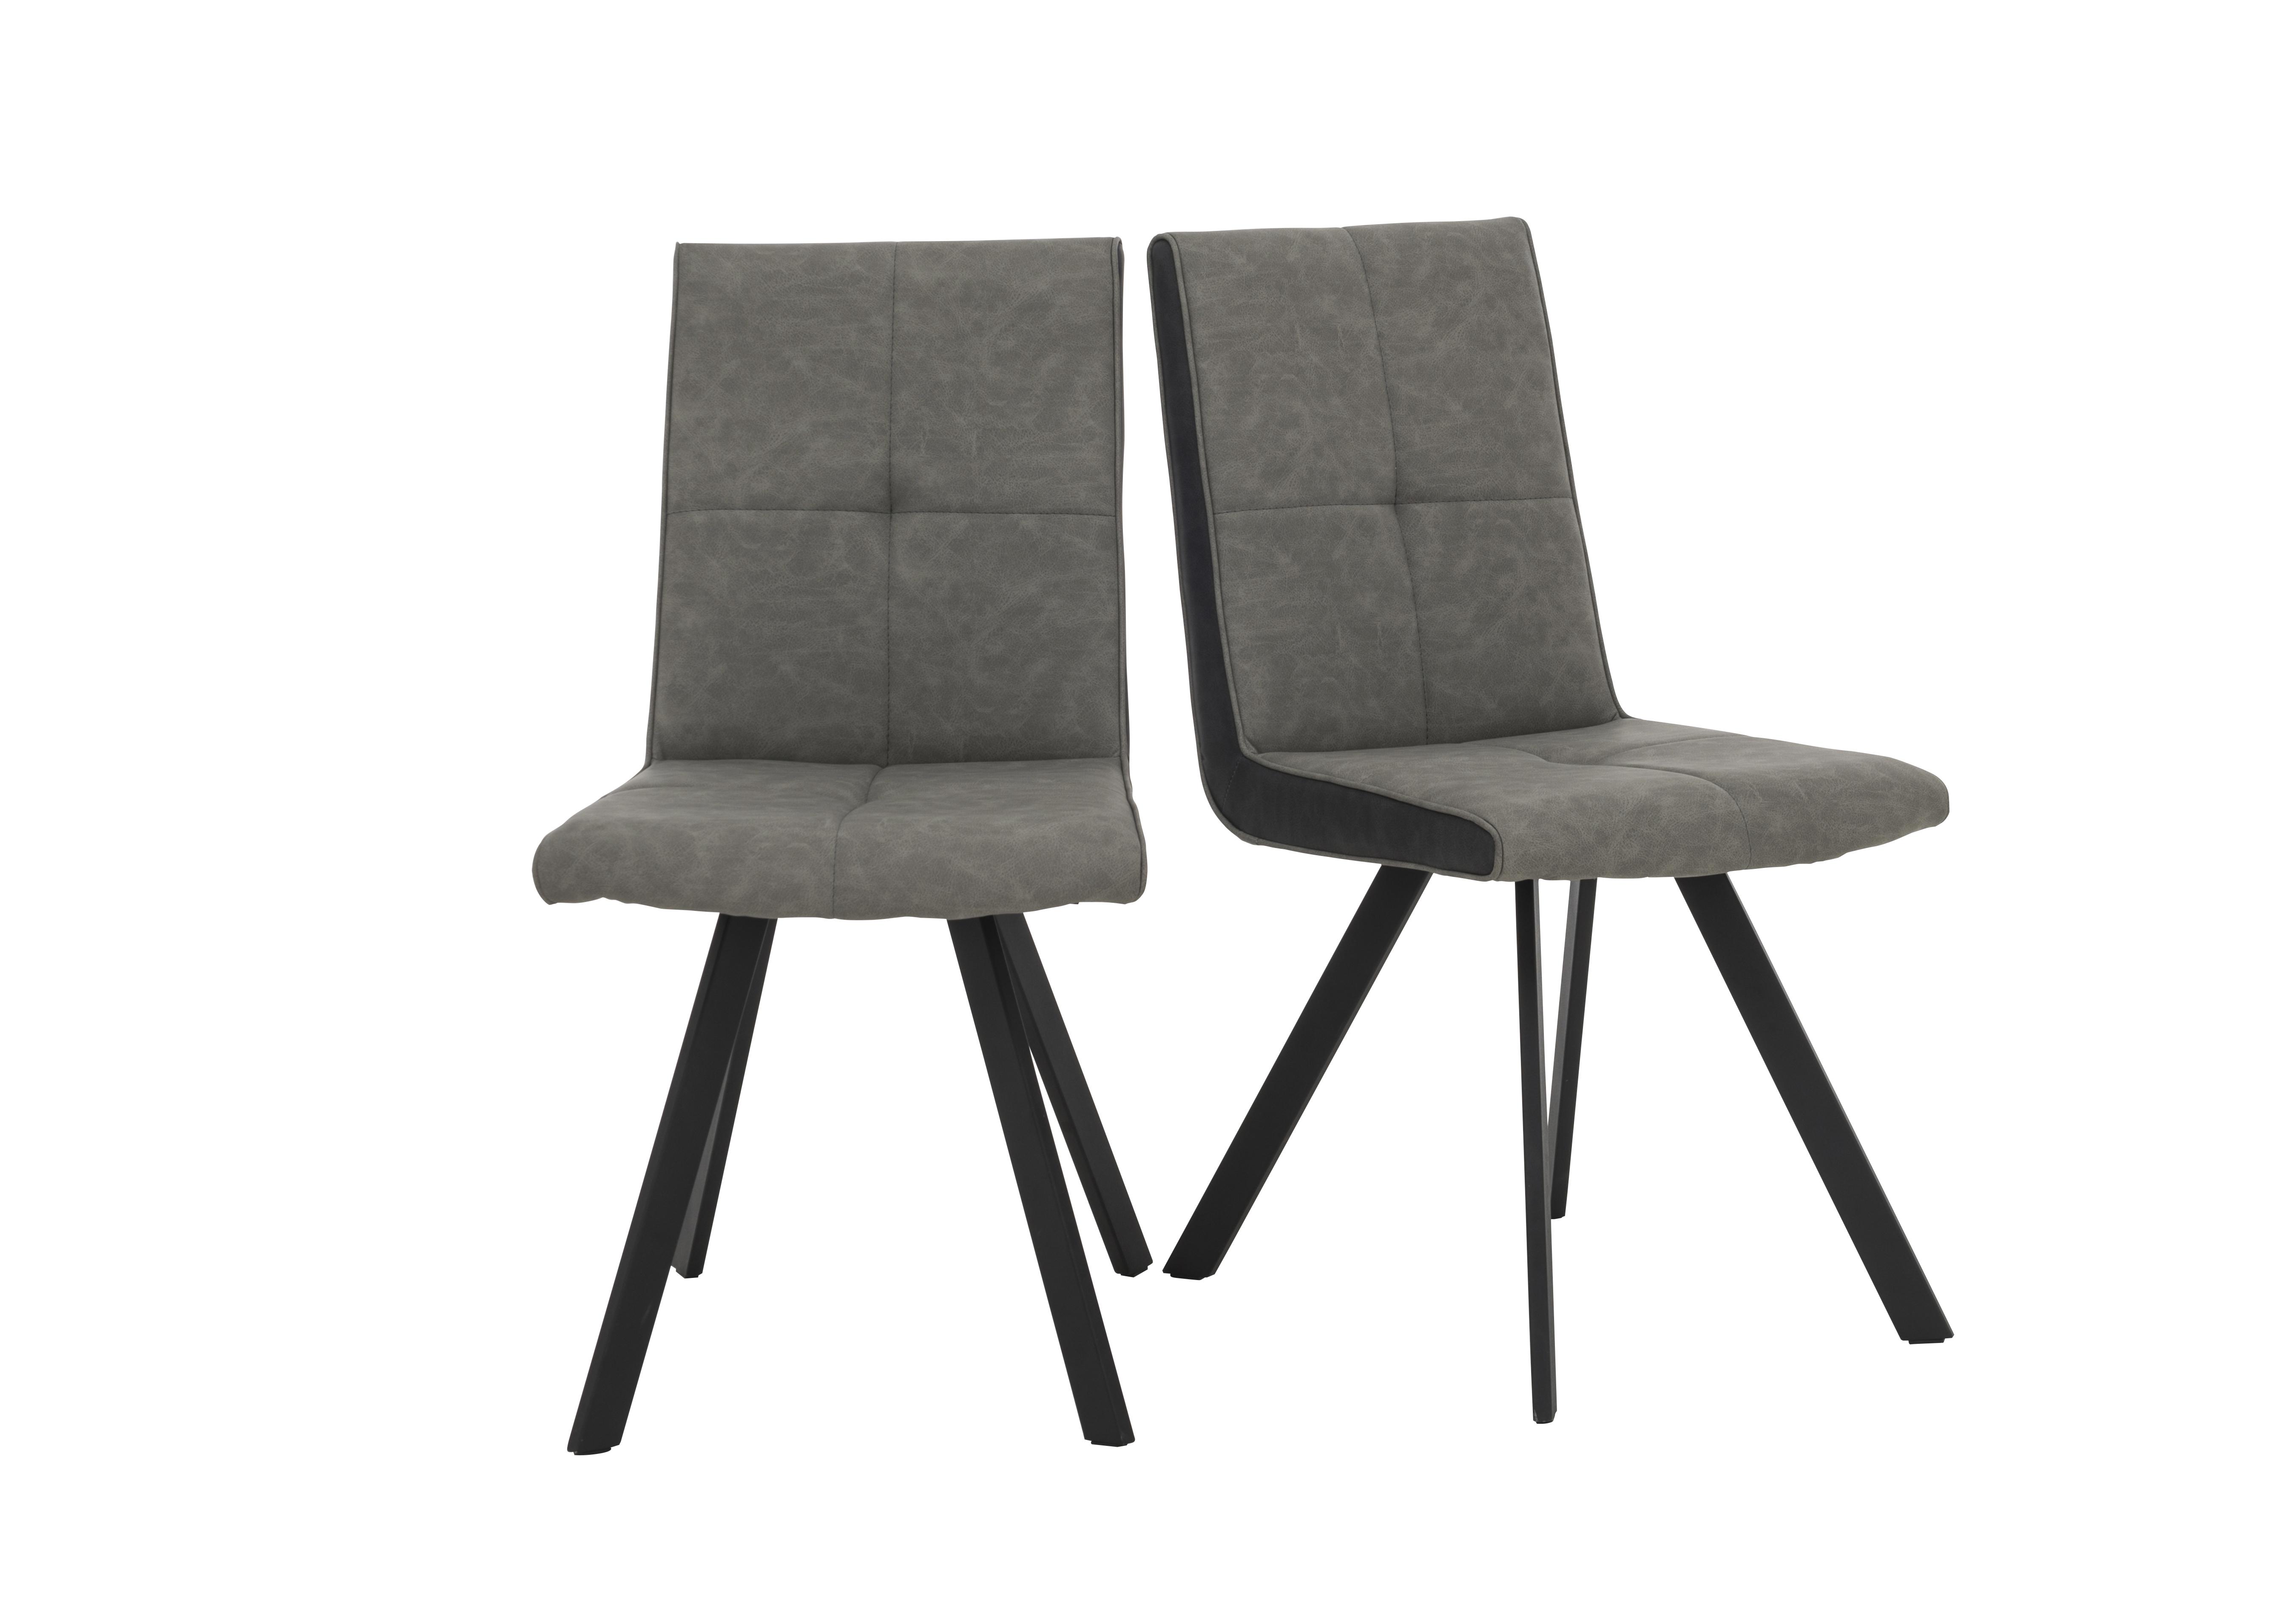 Phoenix Pair of Dining Chairs in Two Tone on Furniture Village